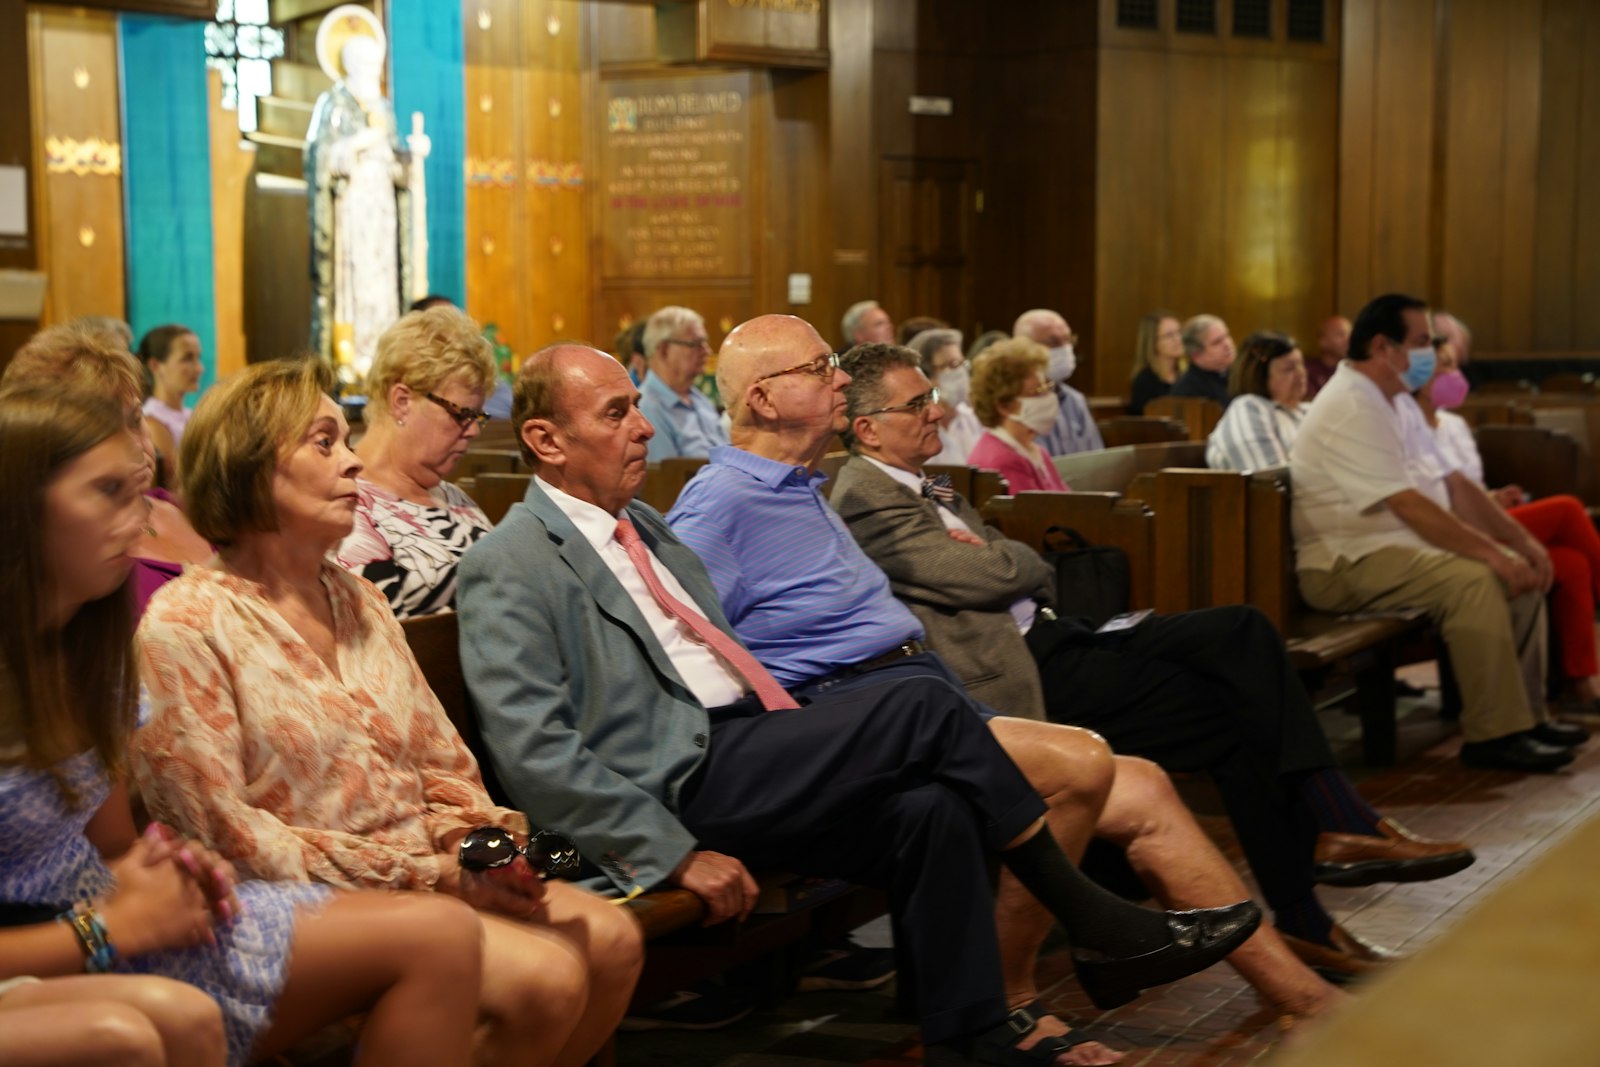 Shrine's monthly "Live at the Basilica" speaker series brings in prominent Catholics to the parish to give talks on different aspects of the faith. (Detroit Catholic file photo by Daniel Meloy)